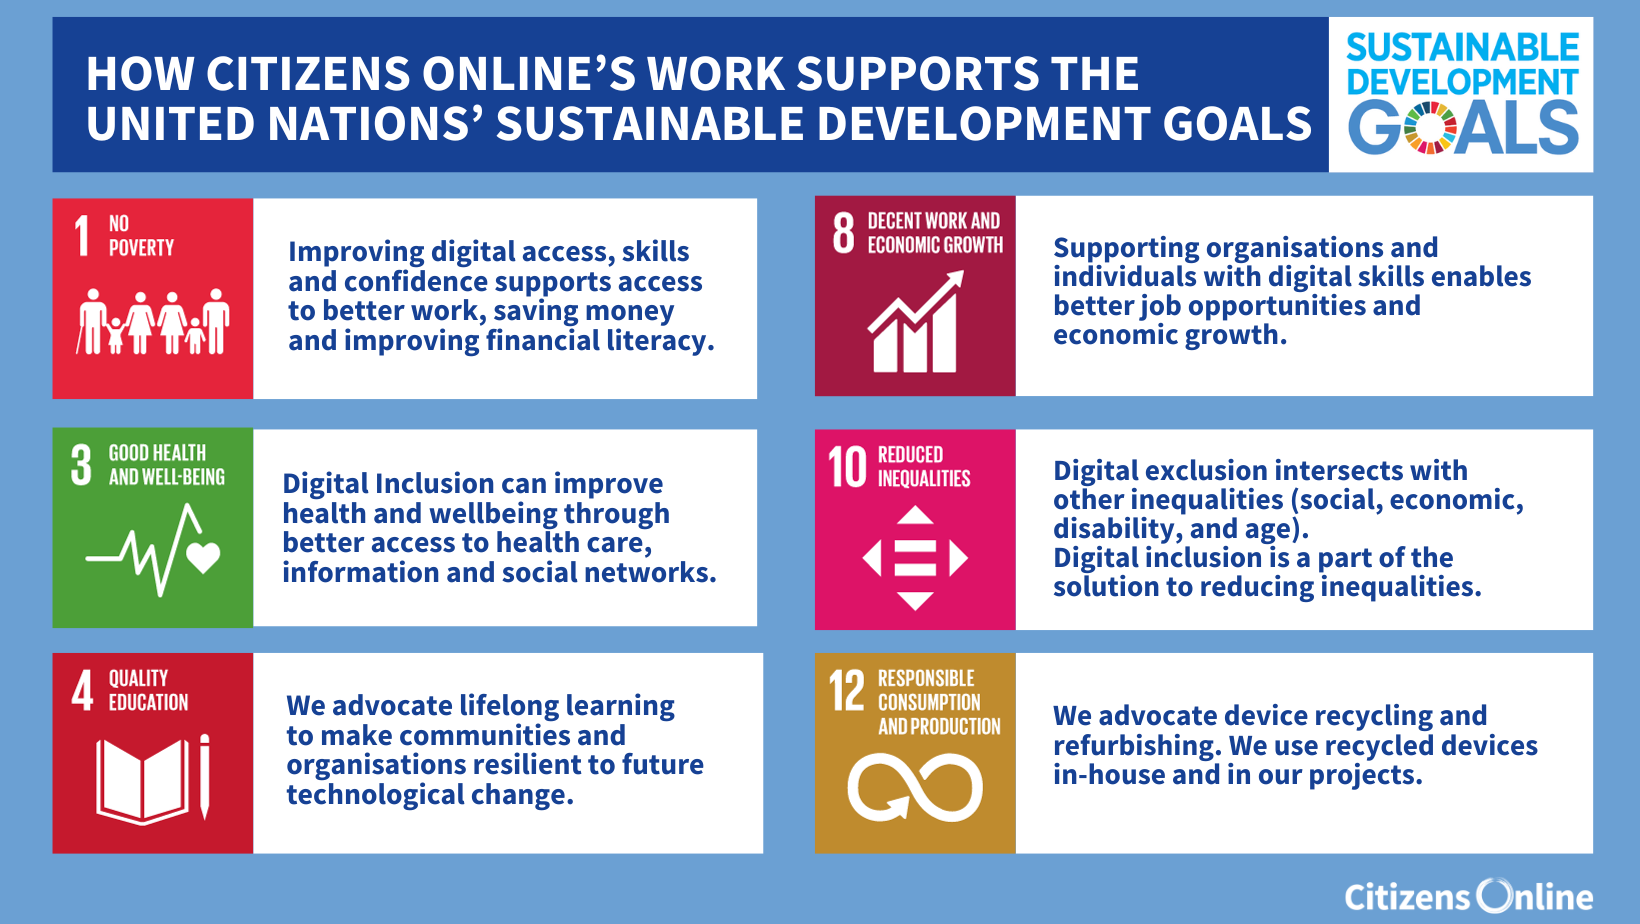 Image from Citizens Online titled 'How Citizens Online's Work supports the United Nations' Sustainable Development Goals', with an associated logo. The image shows the 6 relevant goals: number 1 'No Poverty: Improving digital access, skills and confidence supports access to better work, saving money and improving financial literacy.' Number 3 'Good Health and Well-being: Digital Inclusion can improve health and wellbeing through better access to health care, information and social networks.' Number 4 'Quality Education: We advocate lifelong learning to make communities and organisations resilient to future technological change.' Number 8 'Decent Work and Economic Growth: Supporting organisations and individuals with digital skills enables better job opportunities and economic growth.' Number 10 'Reduced Inequalities: Digital exclusion intersects with other inequalities (social, economic, disability, and age). 
Digital inclusion is a part of the solution to reducing inequalities.' Number 12 'Responsible consumption and Production: We advocate device recycling and refurbishing. We use recycled devices in-house and in our projects.'